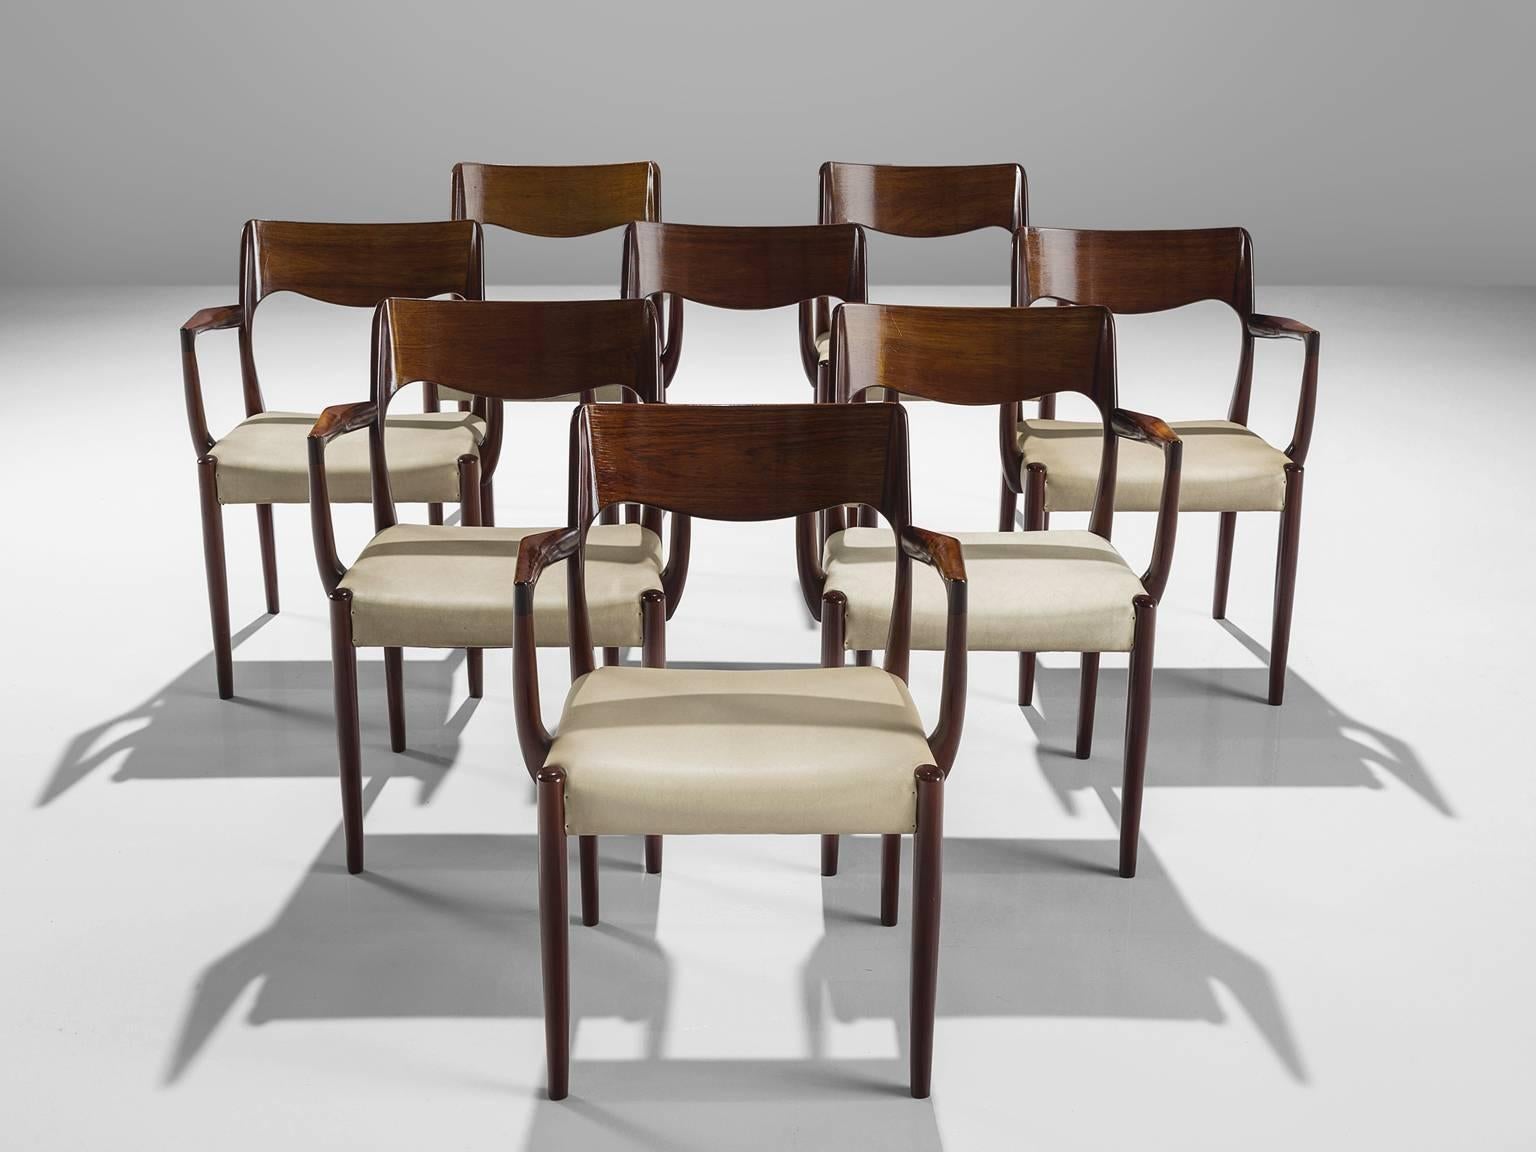 Set of eight armchairs, rosewood, seven in beige ecru faux leather and one in black leather, Denmark, 1950s
 
This set of chairs shows subtle lines and beautiful curves of the woodwork. The highly refined connections of the wood you can see the work